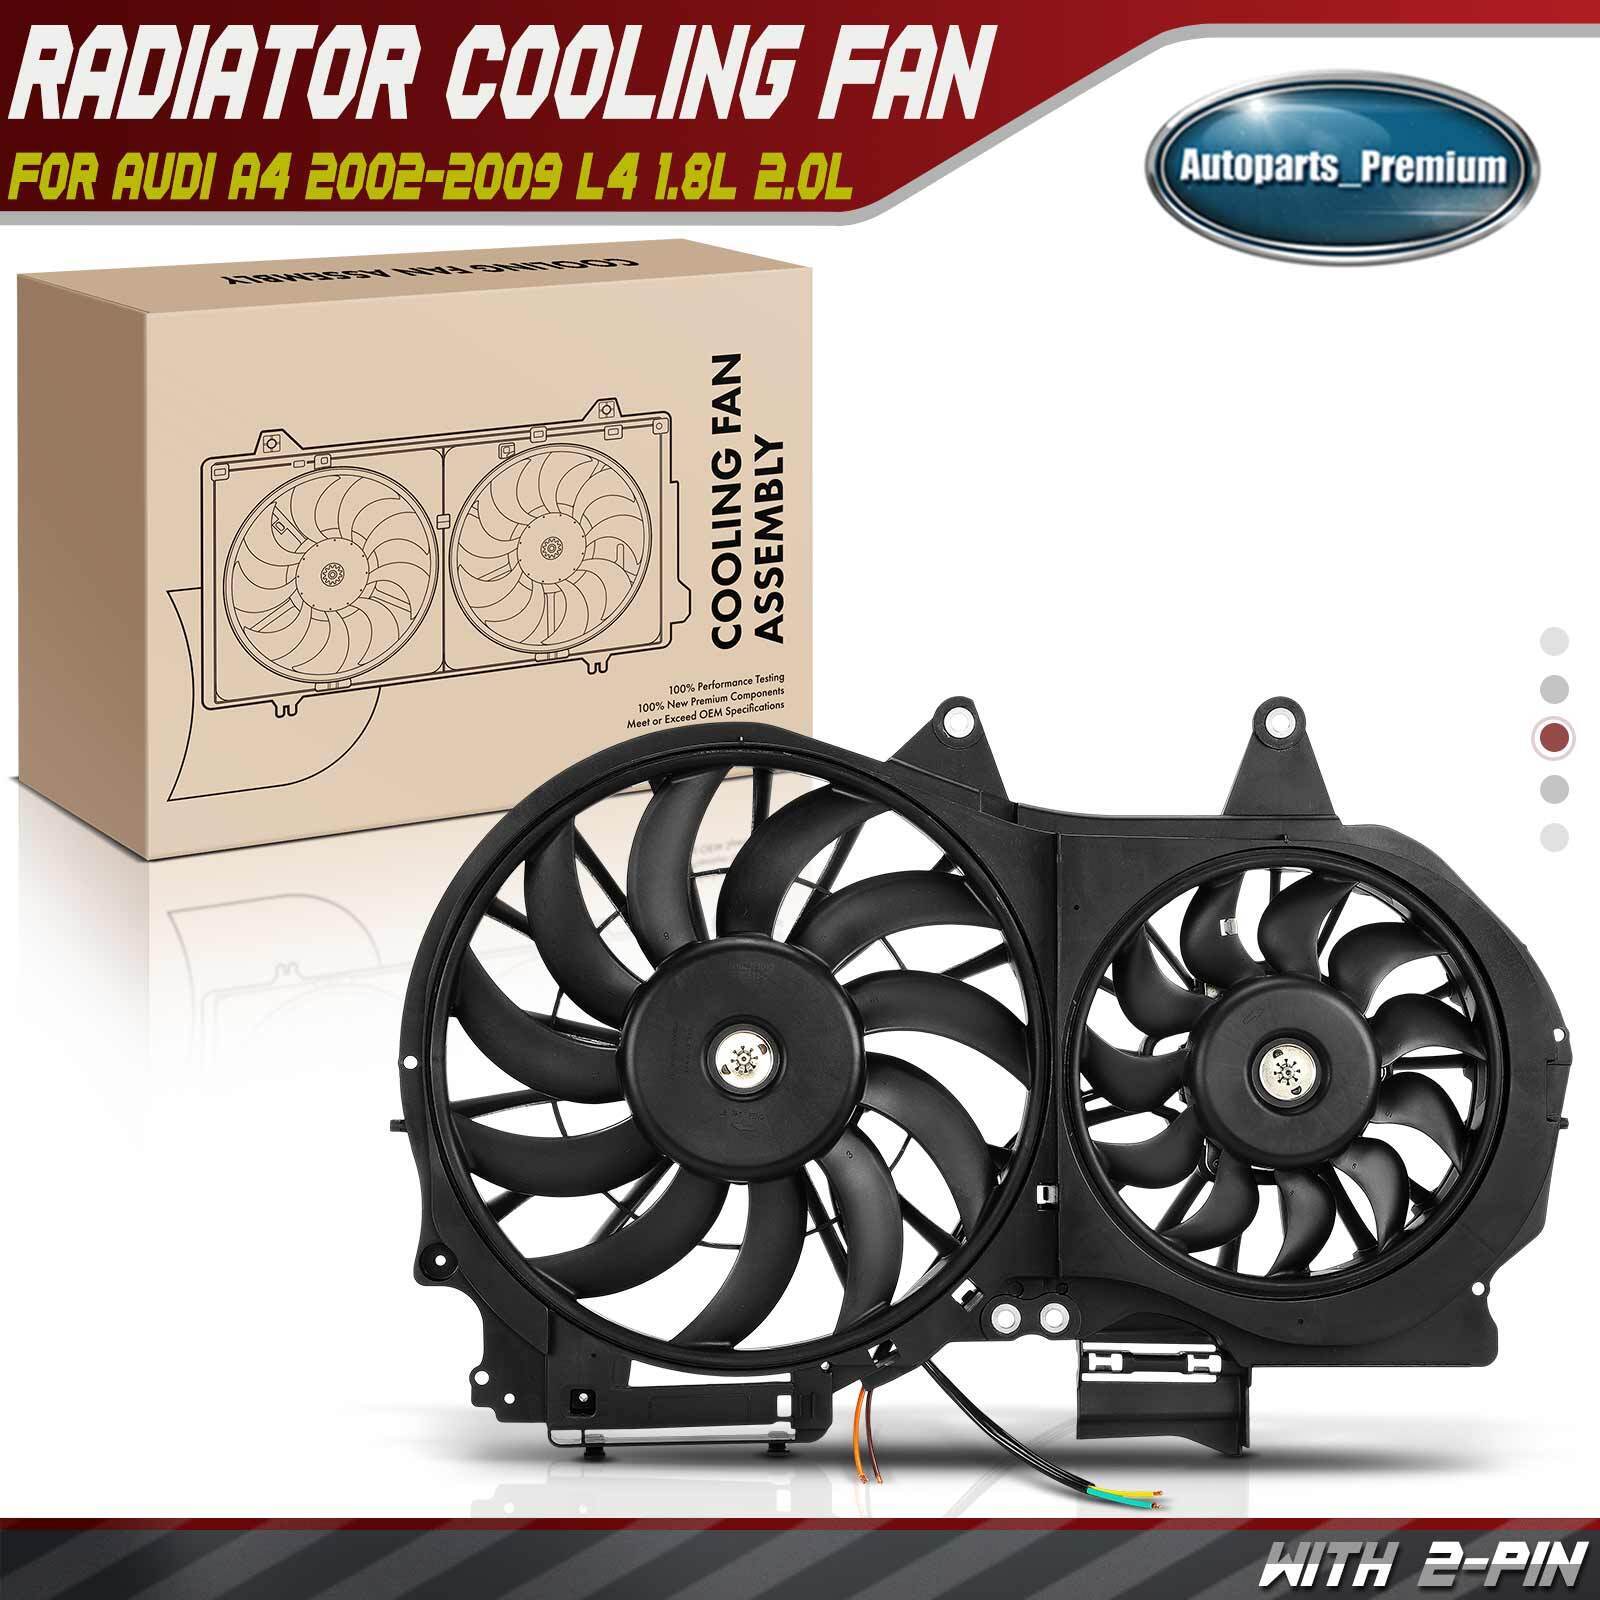 Dual Engine Radiator Cooling Fan w/ Shroud Assembly for Audi A4 02-09 1.8L 2.0L